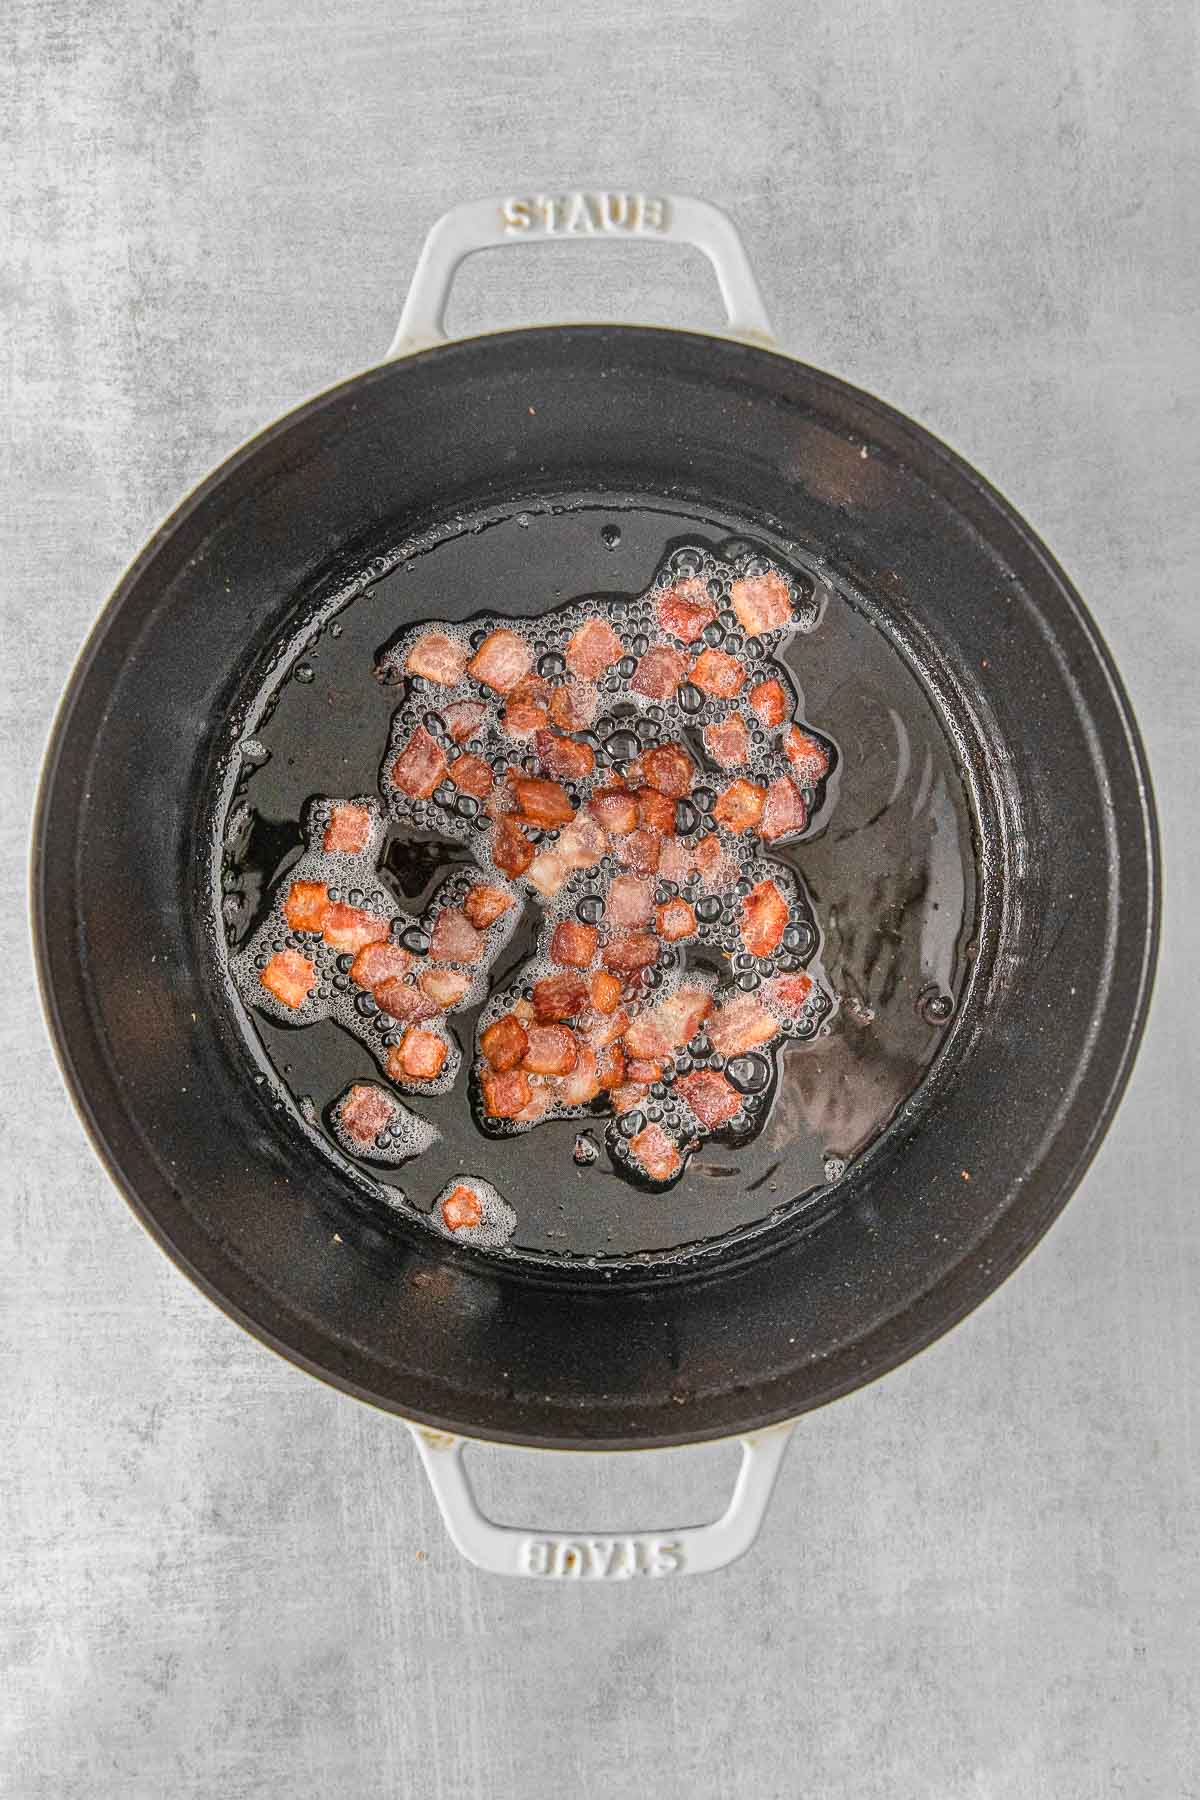 pieces of bacon cooking in a cast iron skillet.